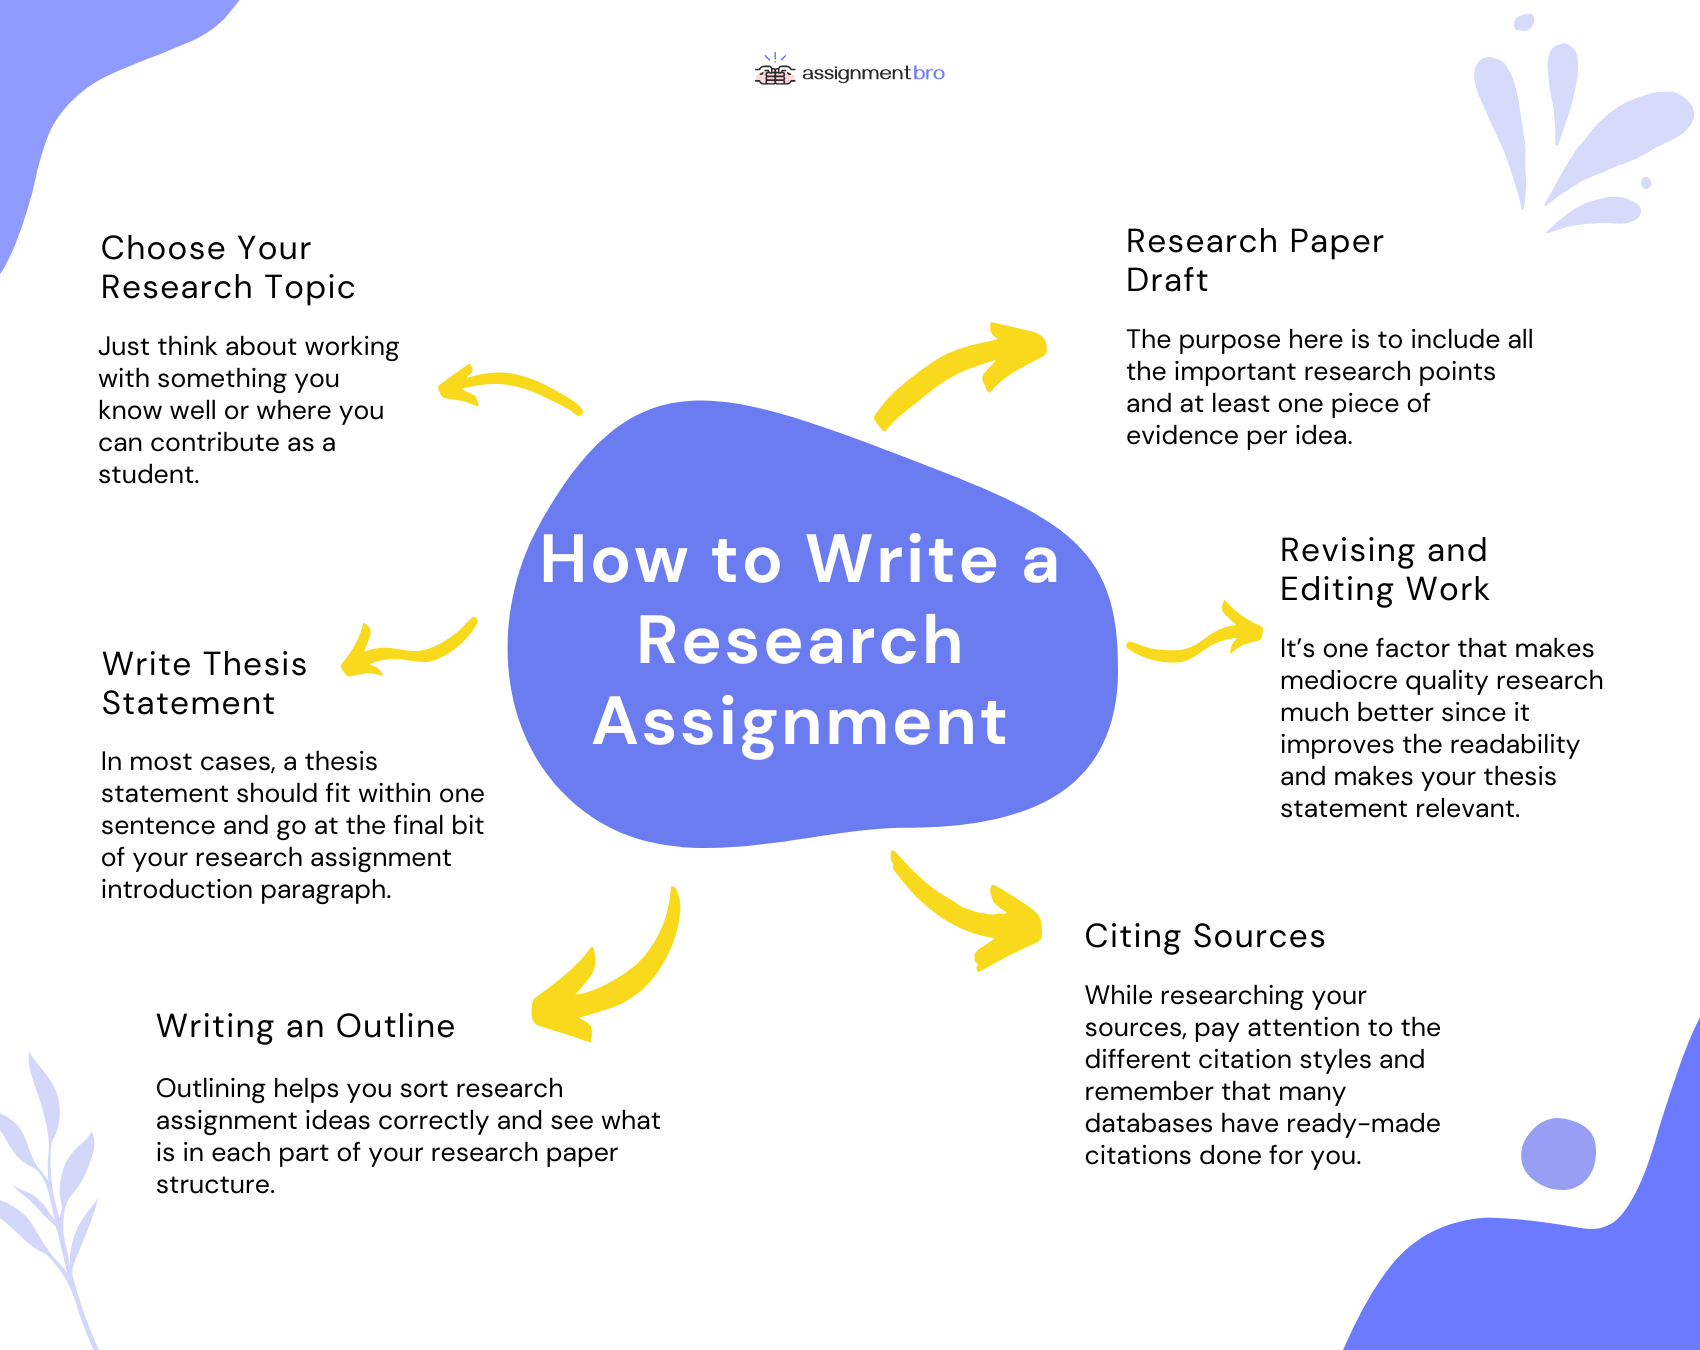 How to Write a Research Assignment